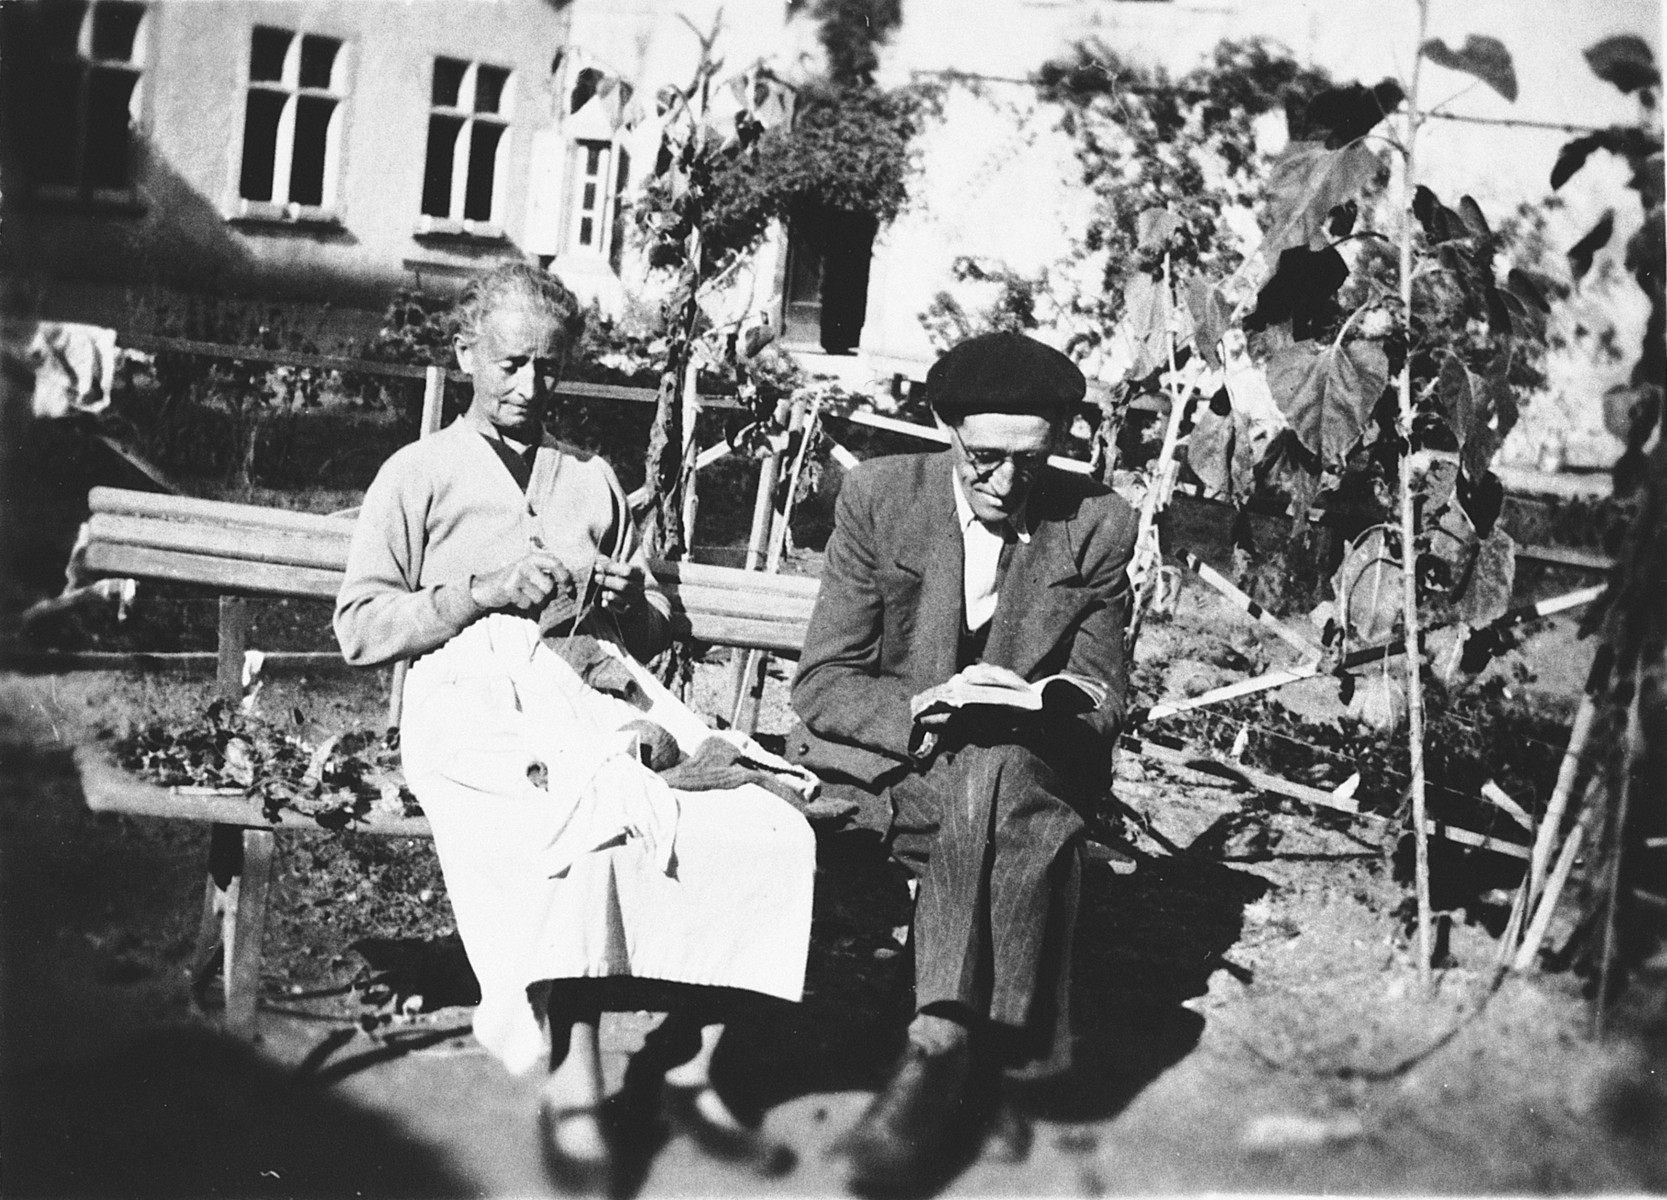 Mr. and Mrs. Nadal, Spanish refugees and staff of Chateau de la Hille, relax outside by knitting and reading.